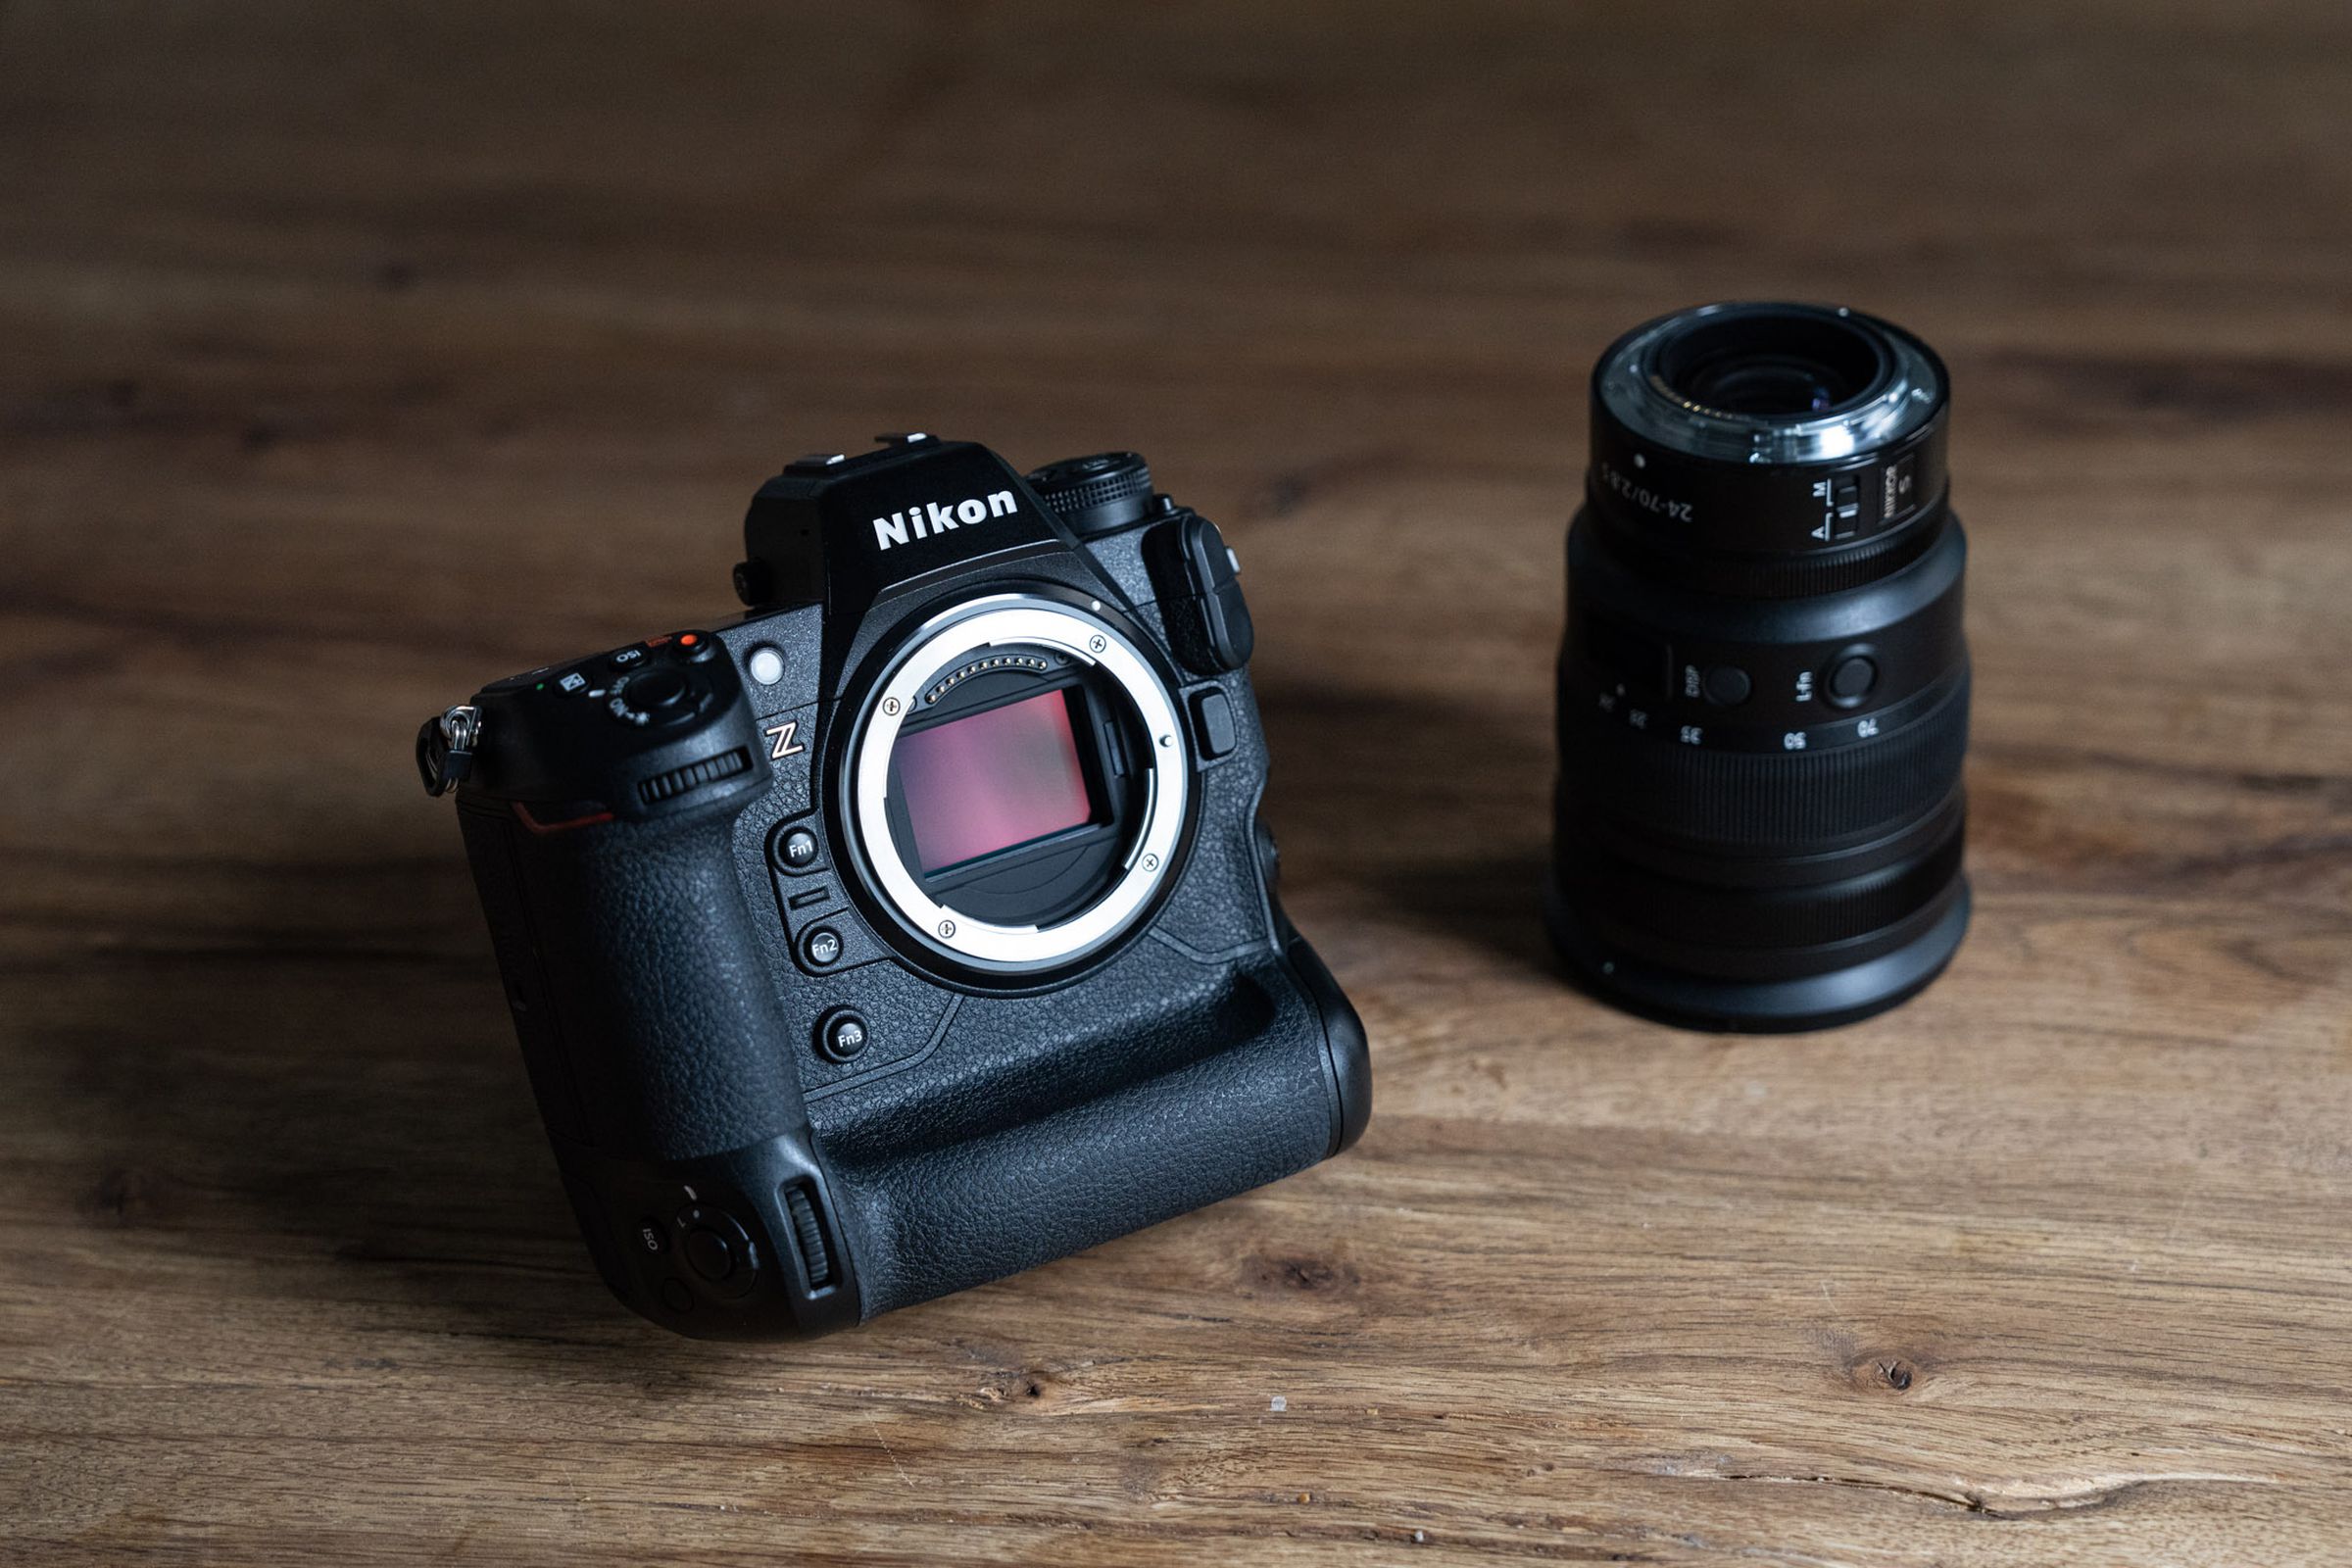 A Nikon Z9 camera sitting on a wood table with its lens next to it.